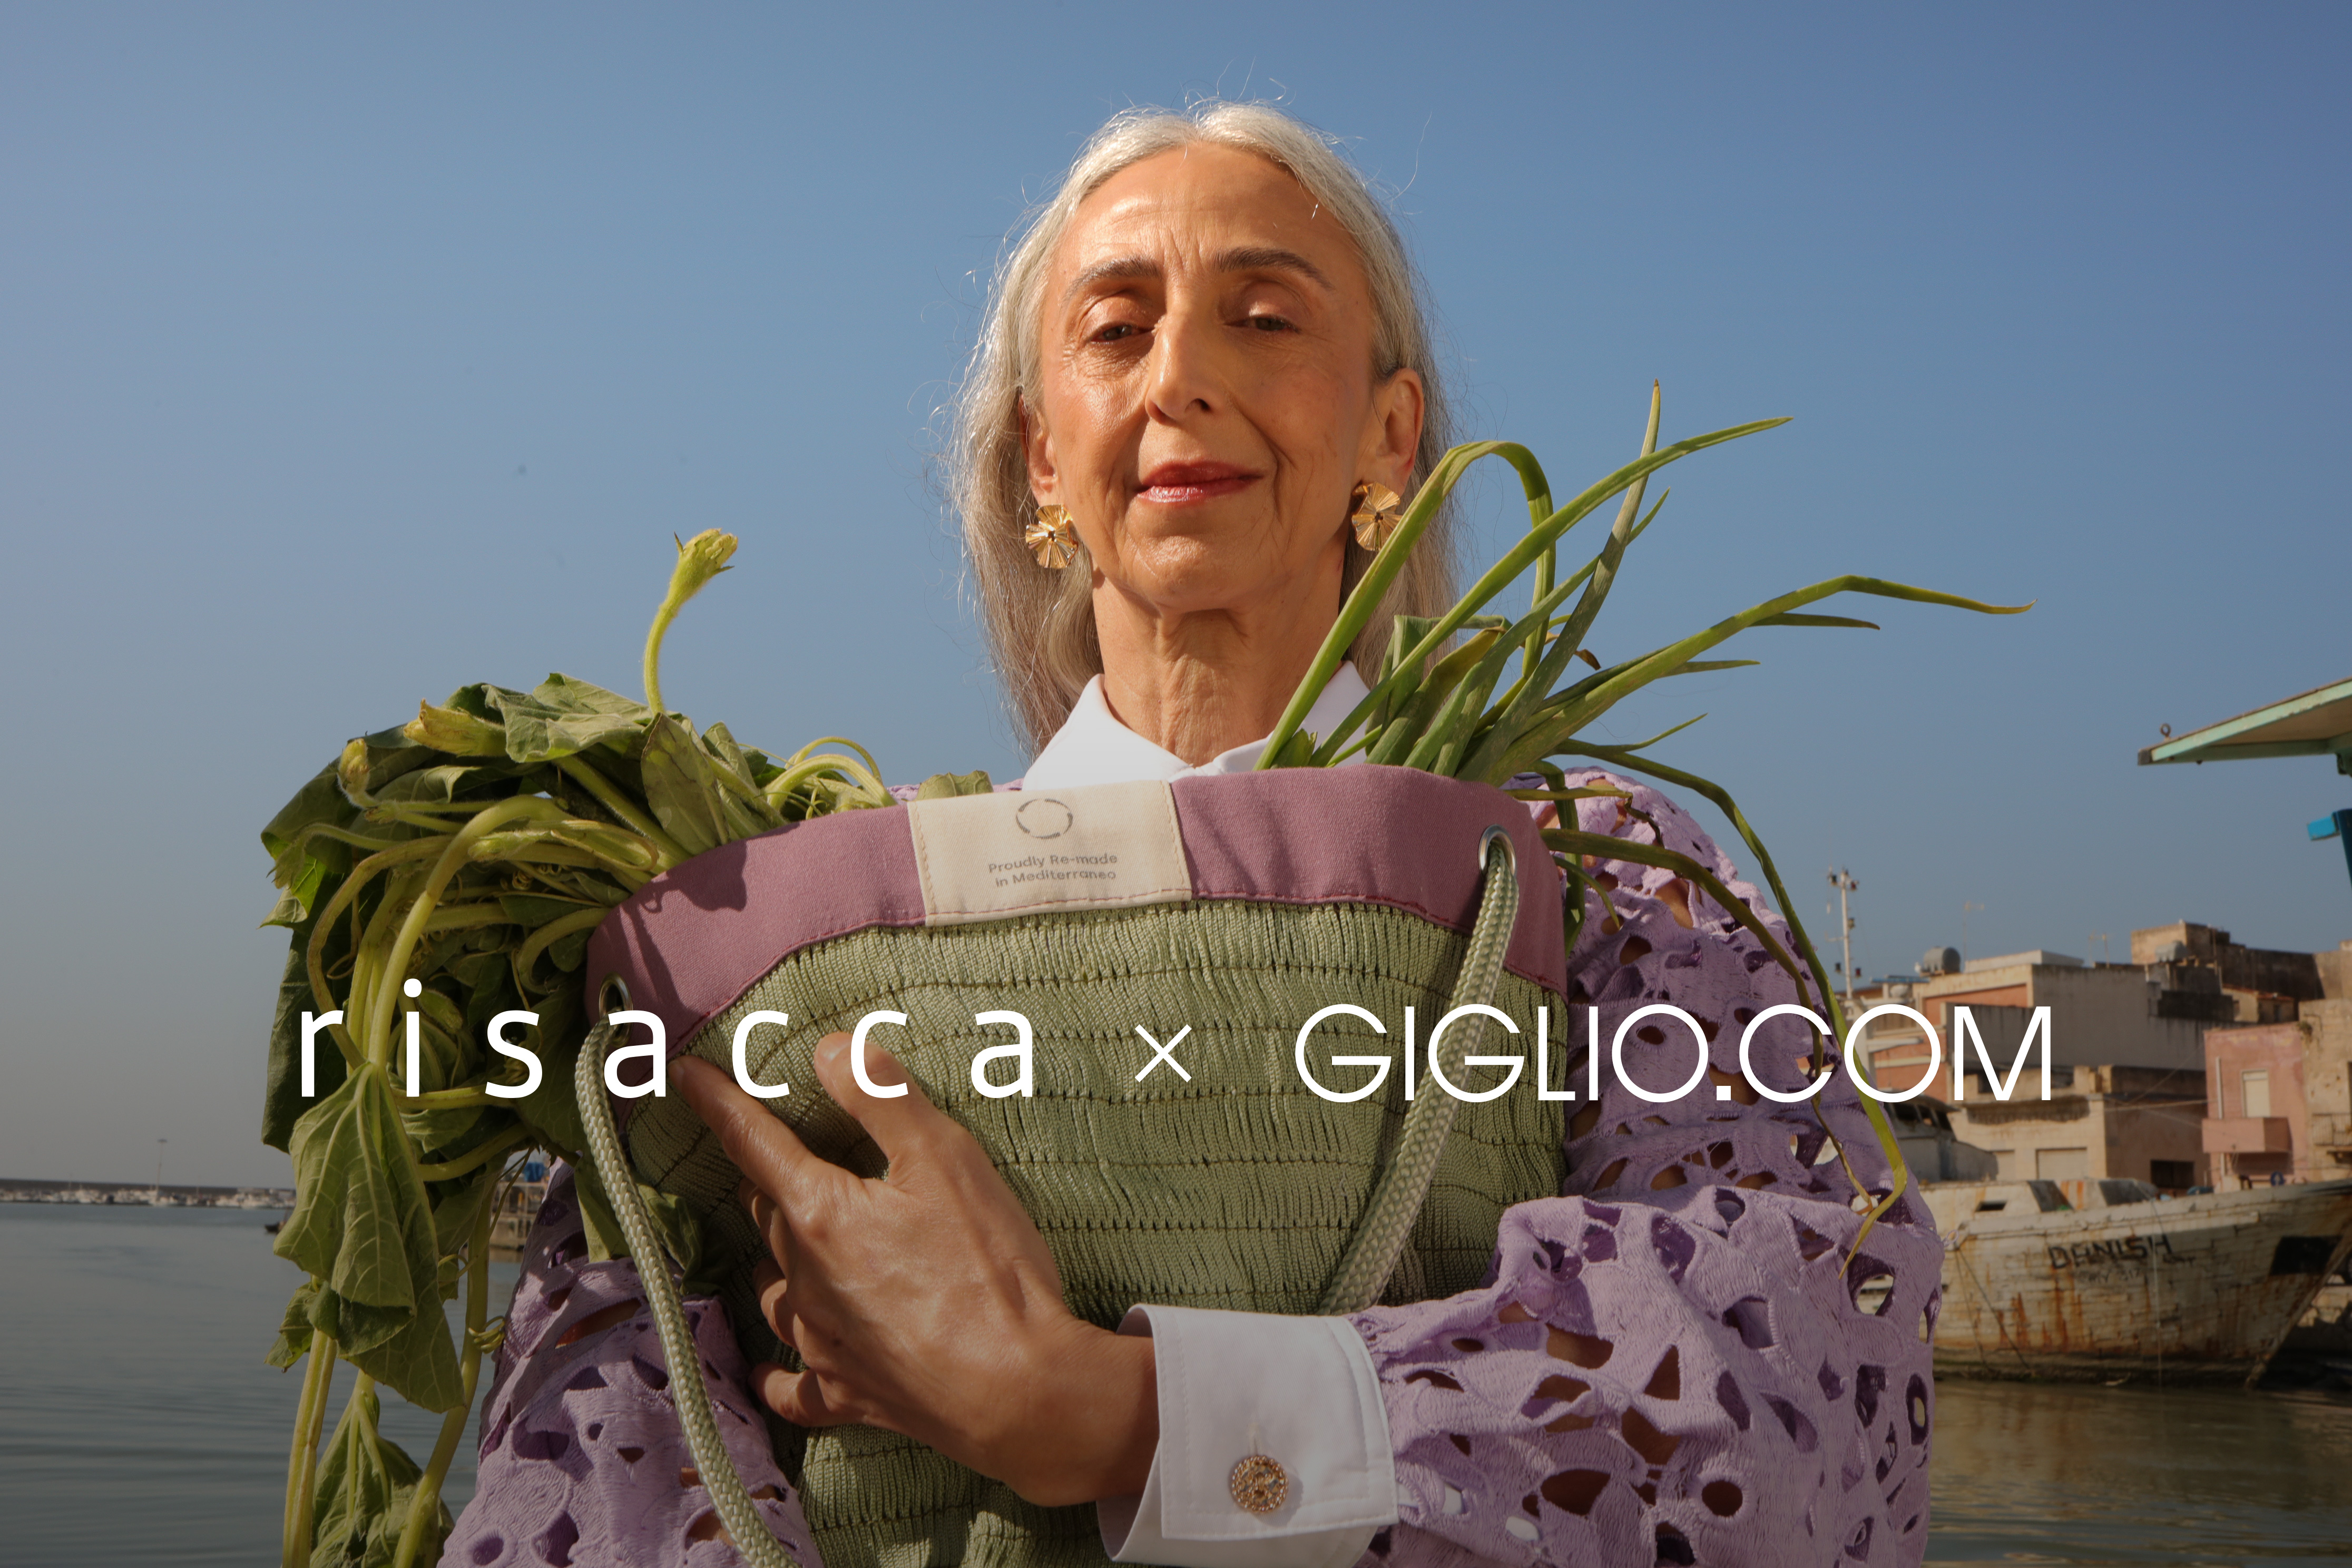 PROUDLY RE-MADE IN MEDITERRANEO: RISACCA X GIGLIO.COM